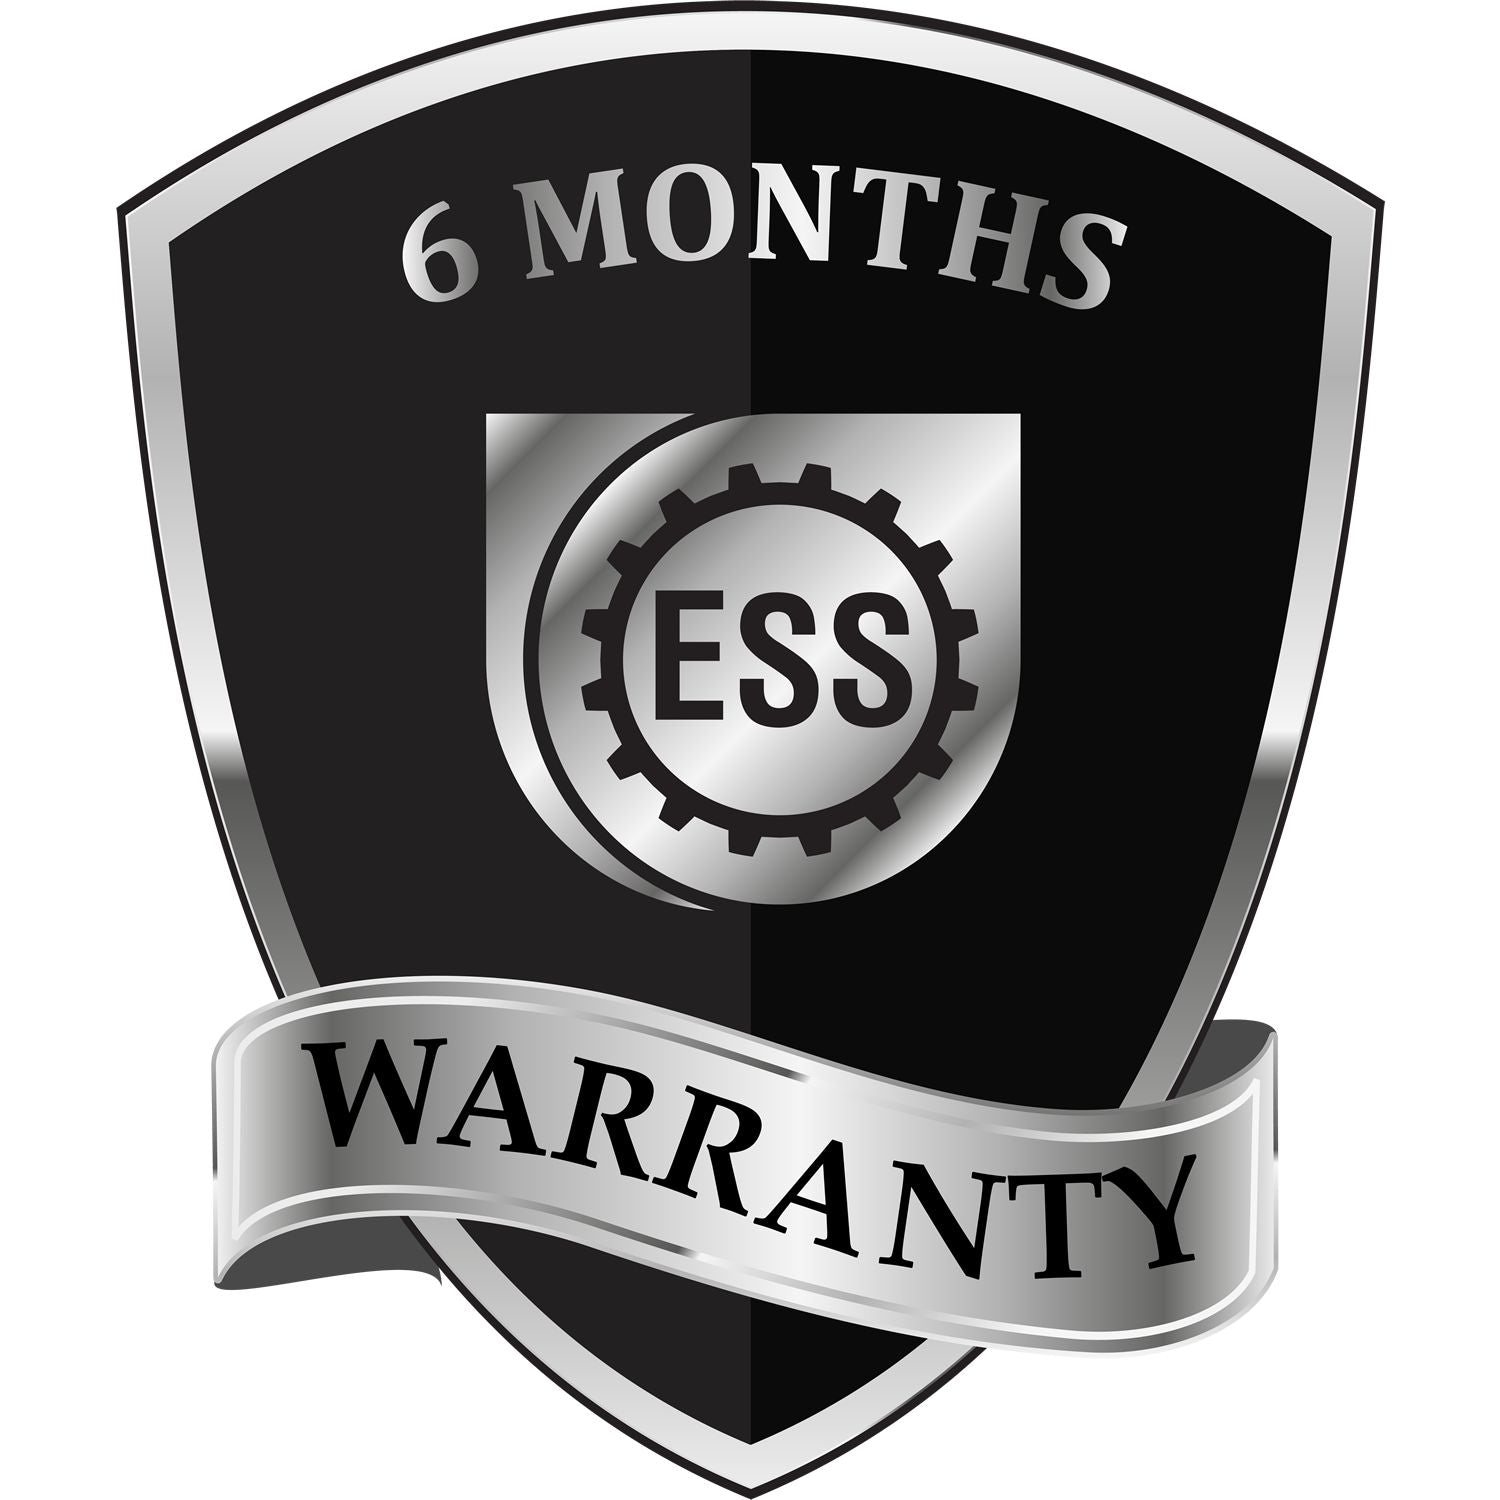 A badge or emblem showing a warranty icon for the Self-Inking Mississippi PE Stamp